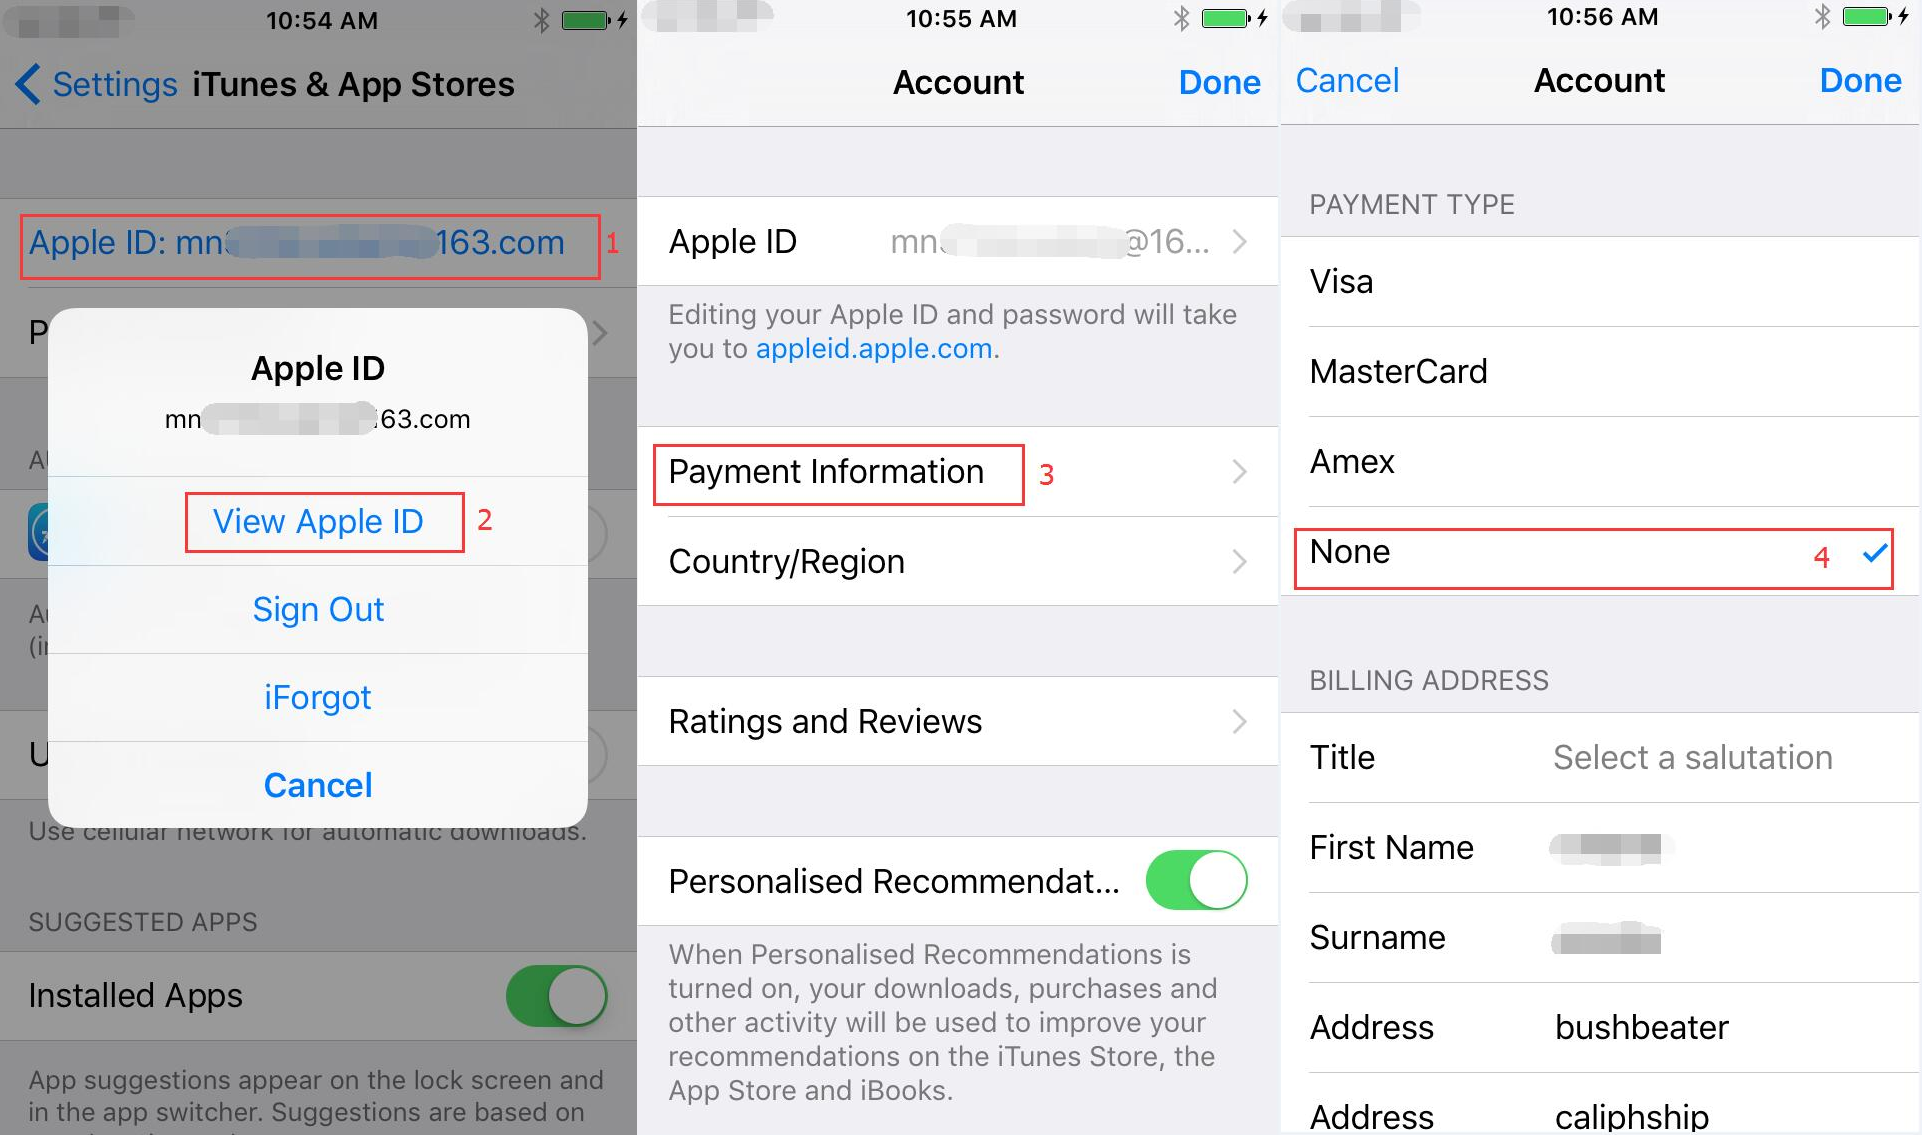 How to Unbind Bank Cards Using Apple ID?